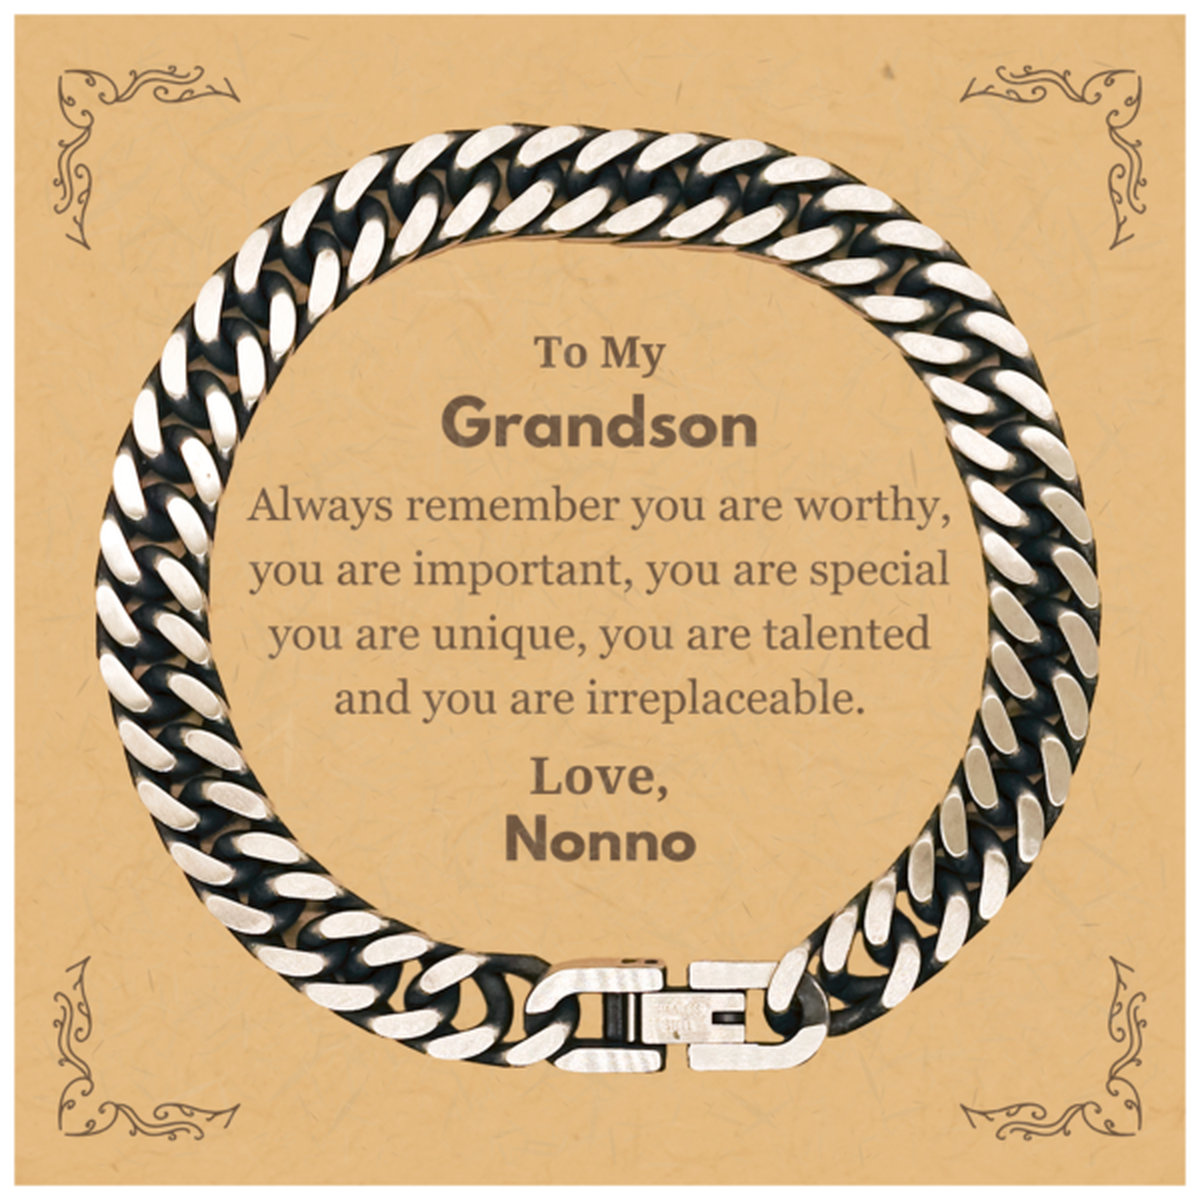 Grandson Birthday Gifts from Nonno, Inspirational Cuban Link Chain Bracelet for Grandson Christmas Graduation Gifts for Grandson Always remember you are worthy, you are important. Love, Nonno